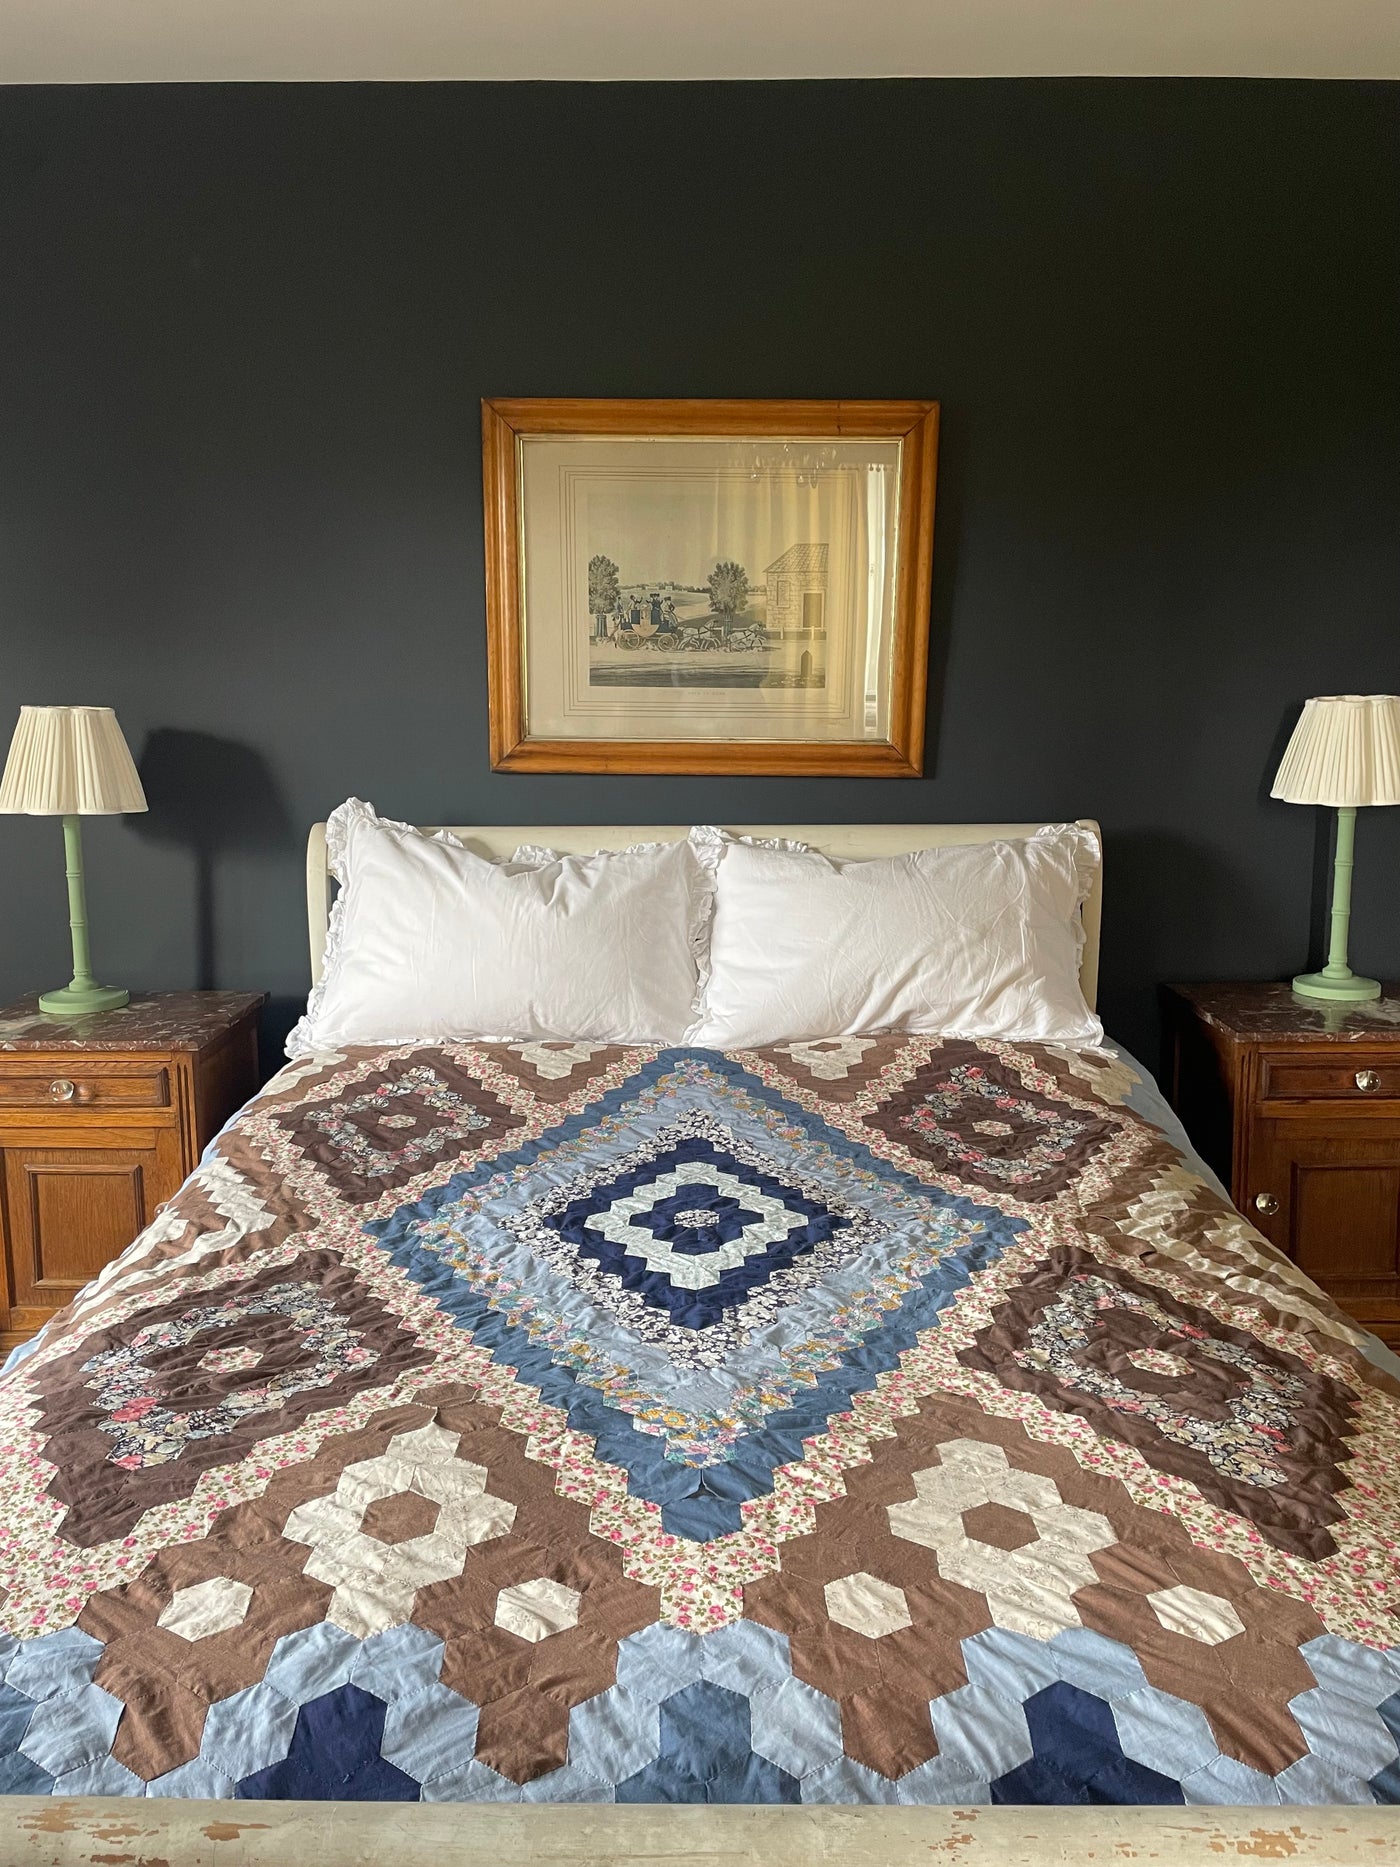 Quilts & bedspreads